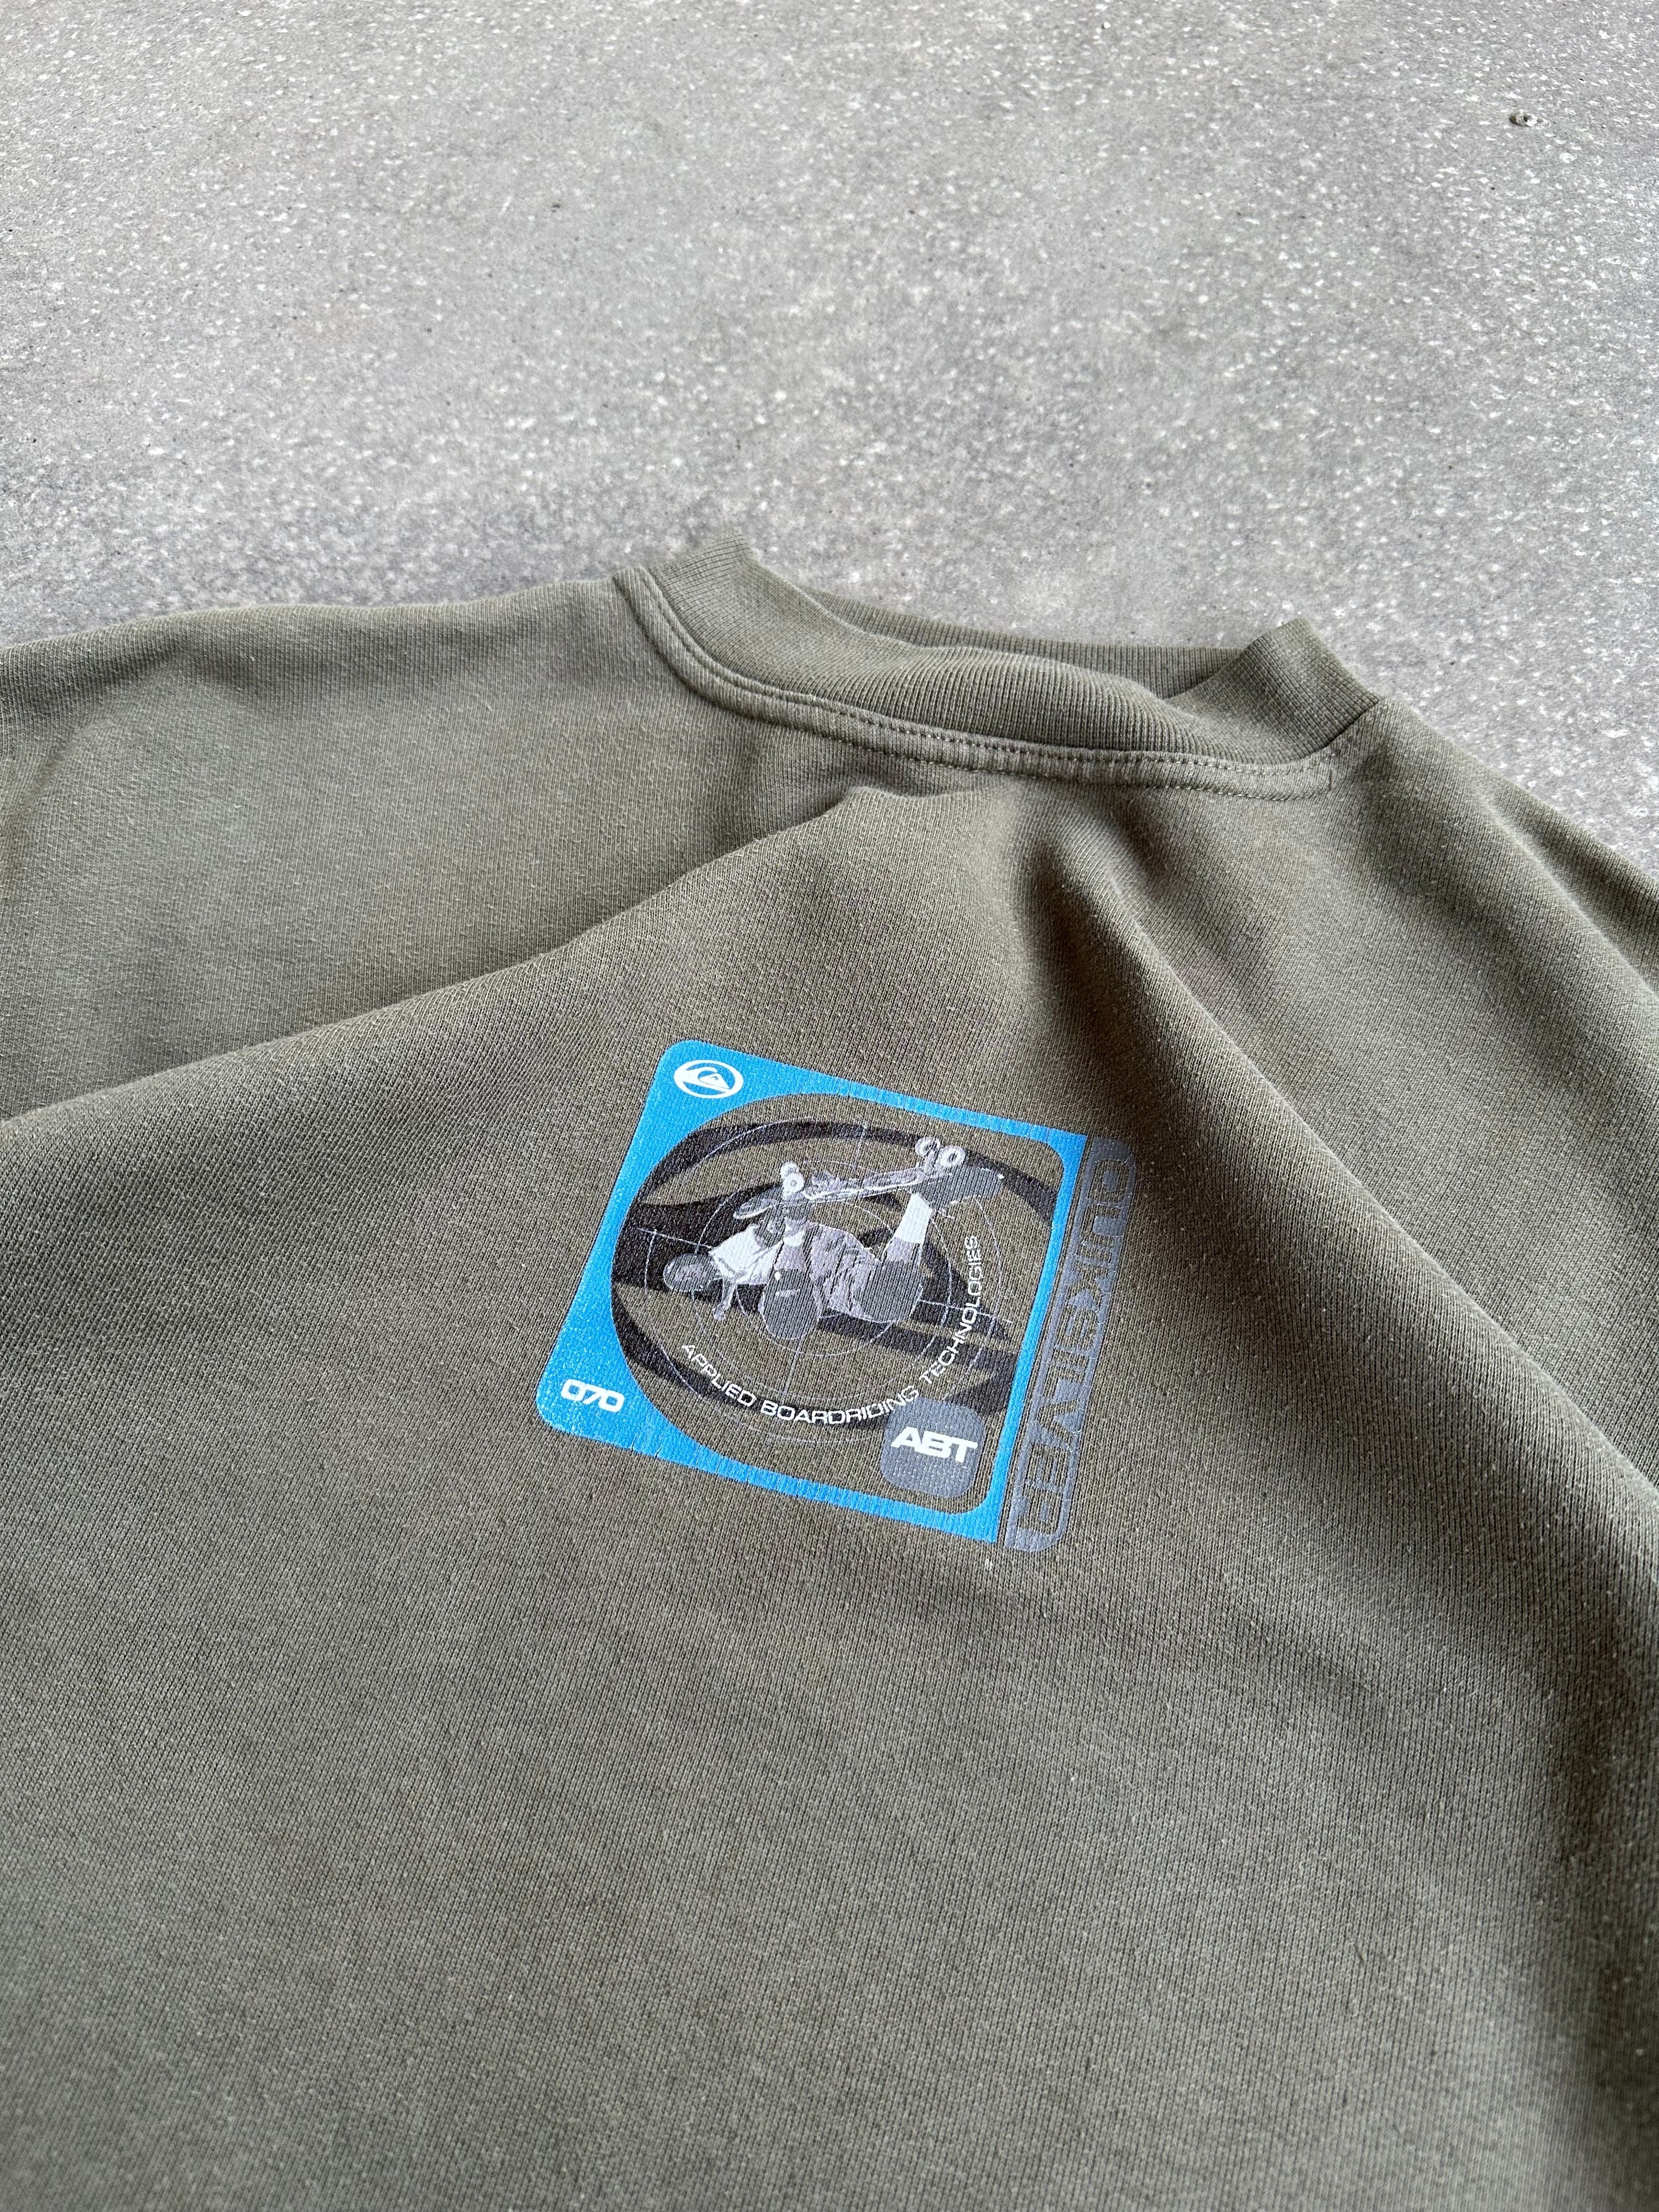 Vintage Quiksilver Sweater - Extra Small